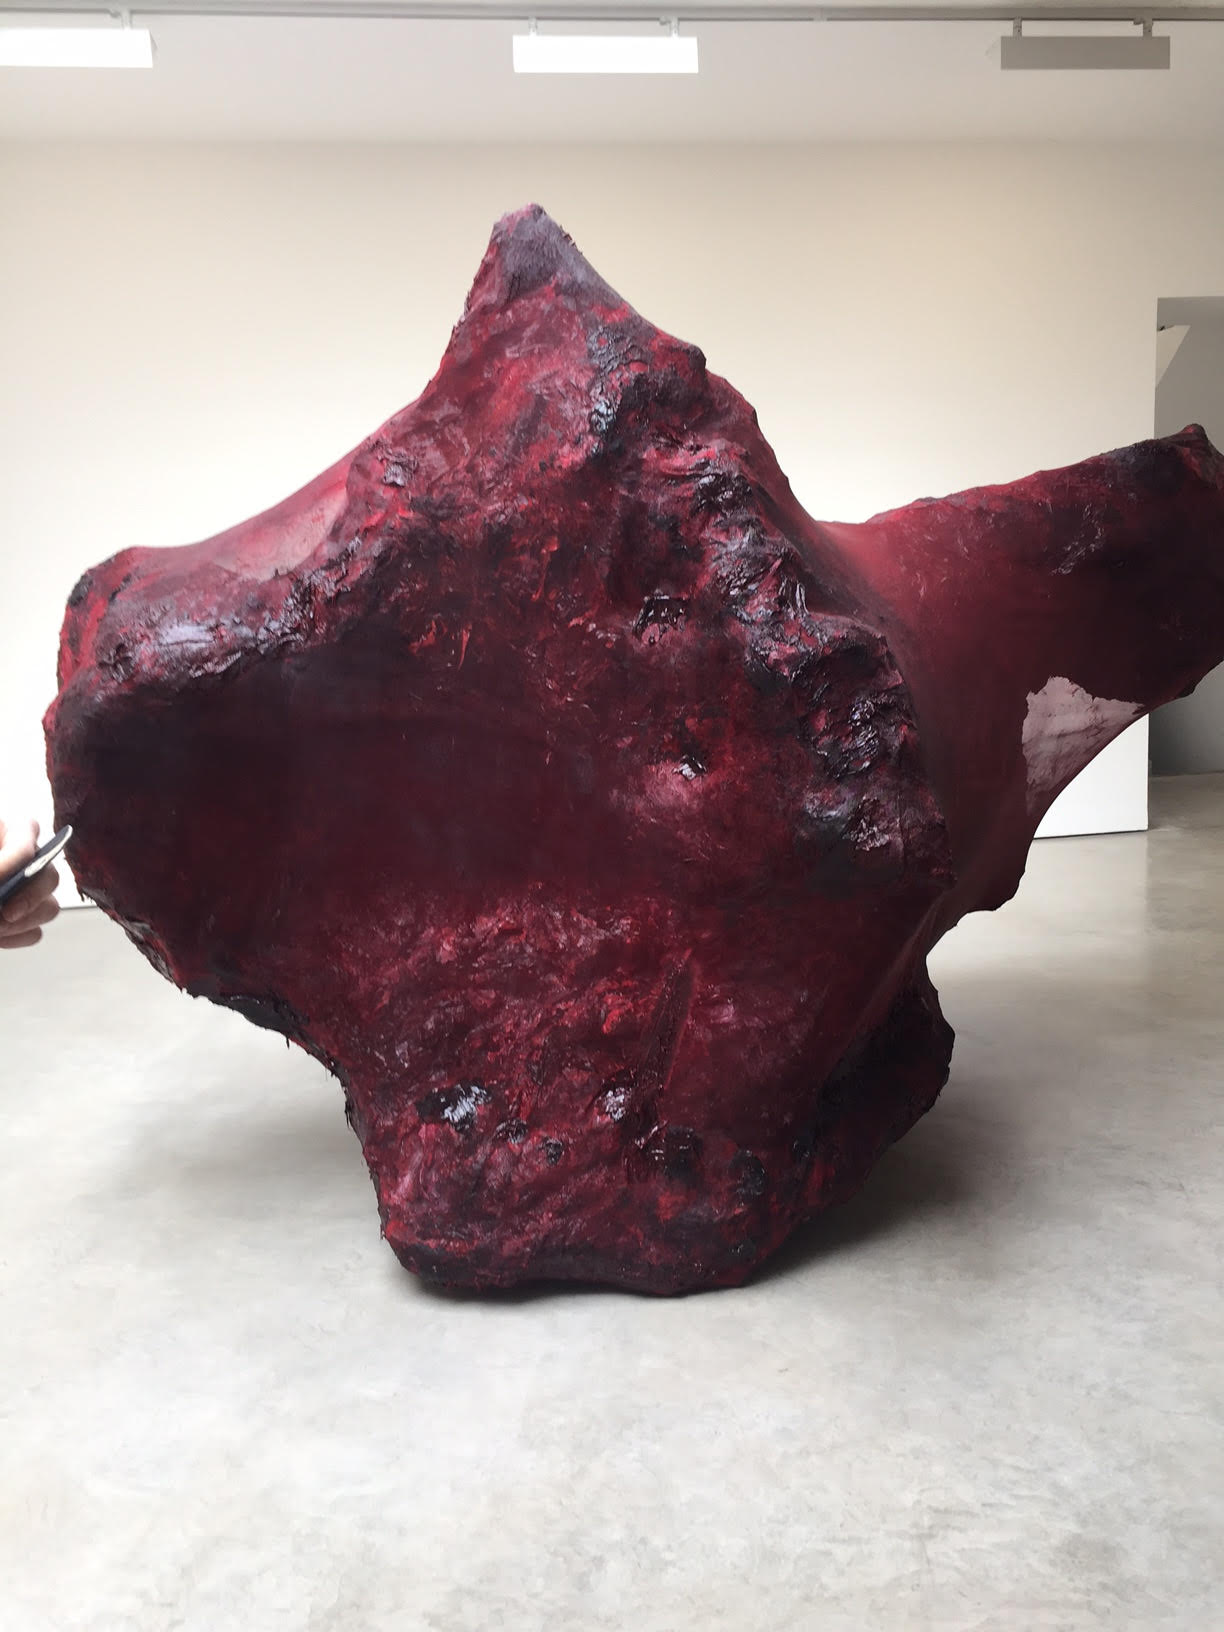 Anish Kapoor Lisson gallery image by Mark Hayes Westall 